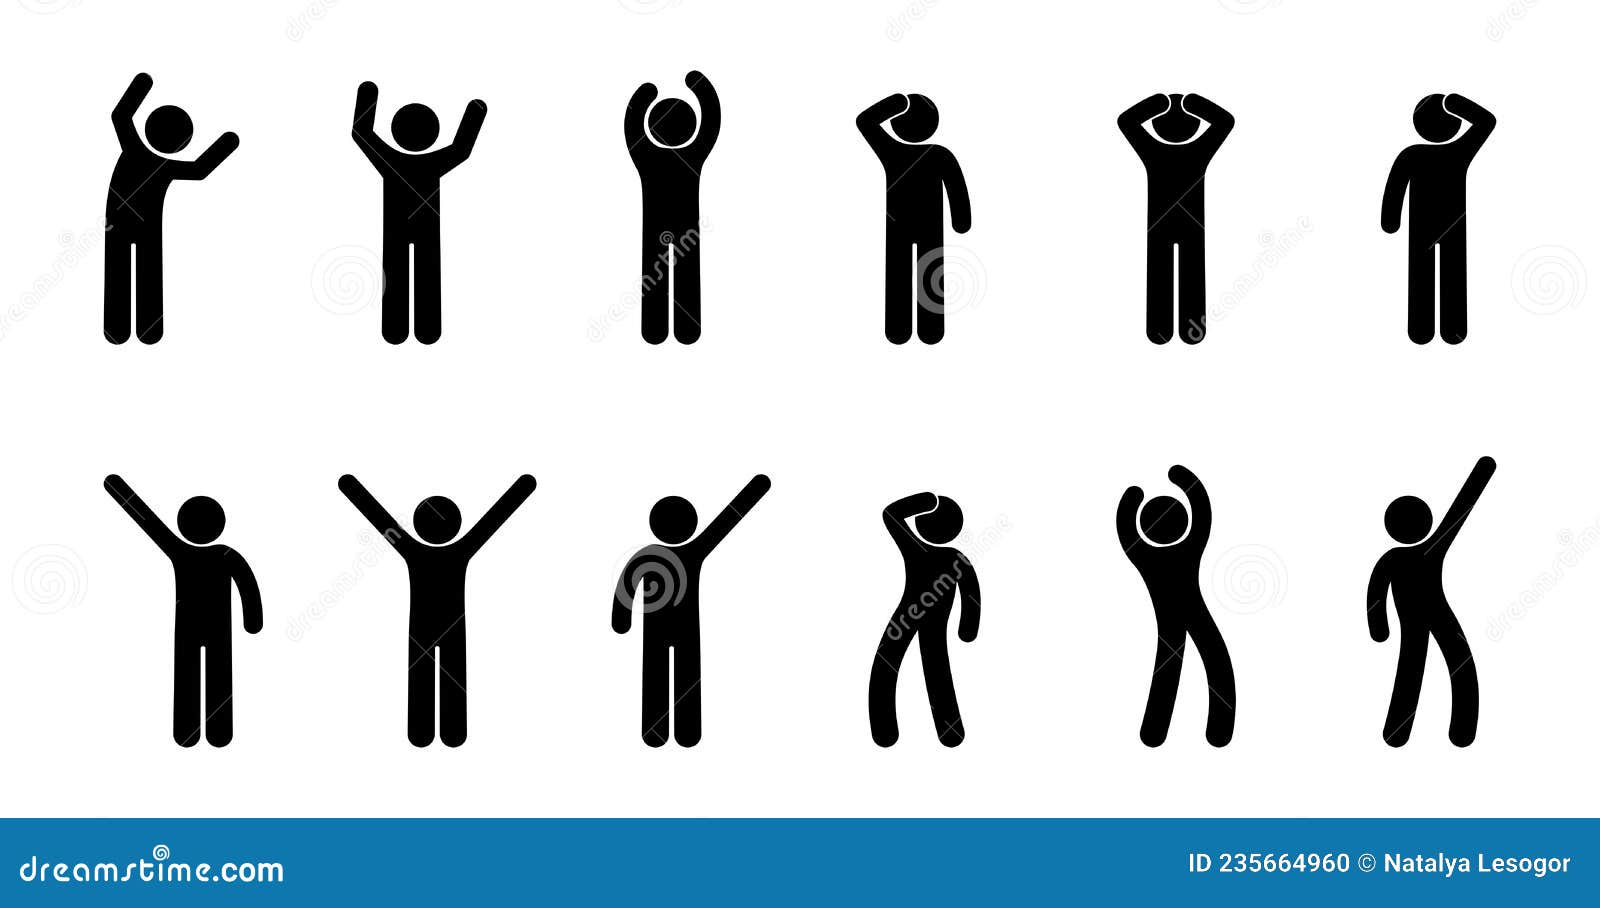 https://thumbs.dreamstime.com/z/people-waving-their-hands-various-gestures-icon-person-gesturing-human-silhouette-stands-stick-figure-pictogram-235664960.jpg